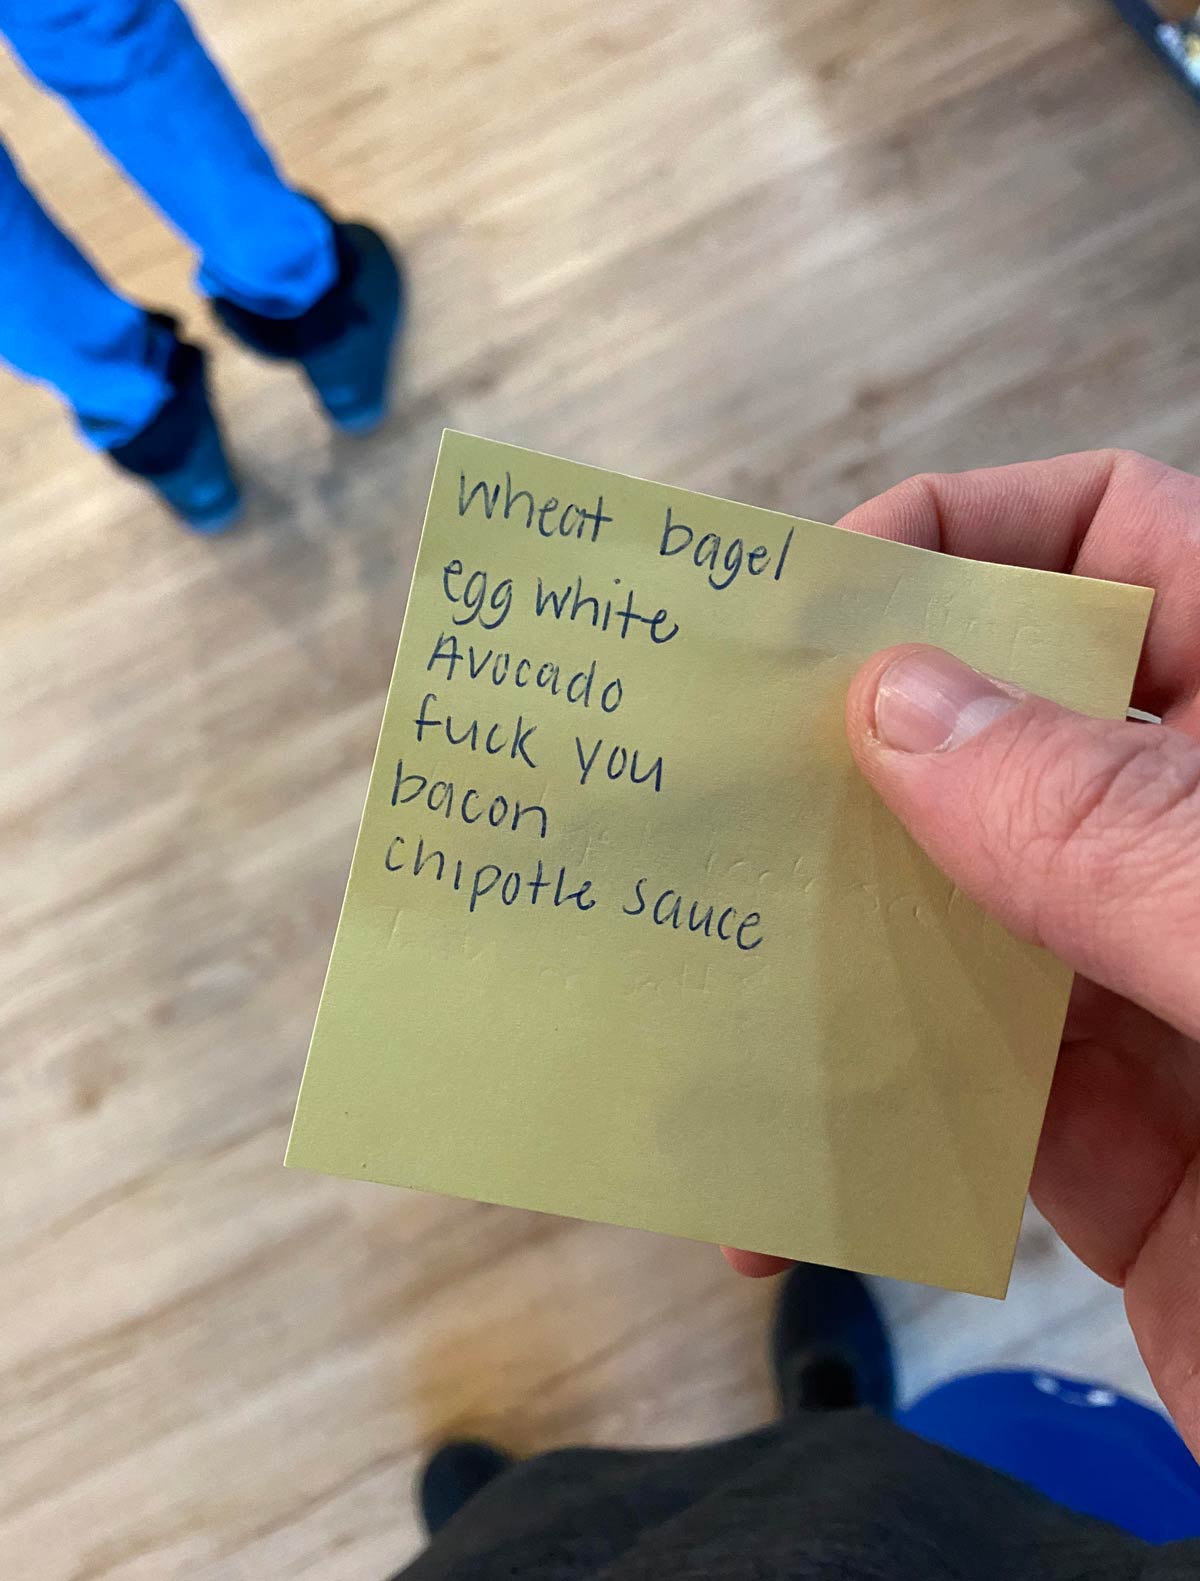 Wife gave me a note for her breakfast bagel order